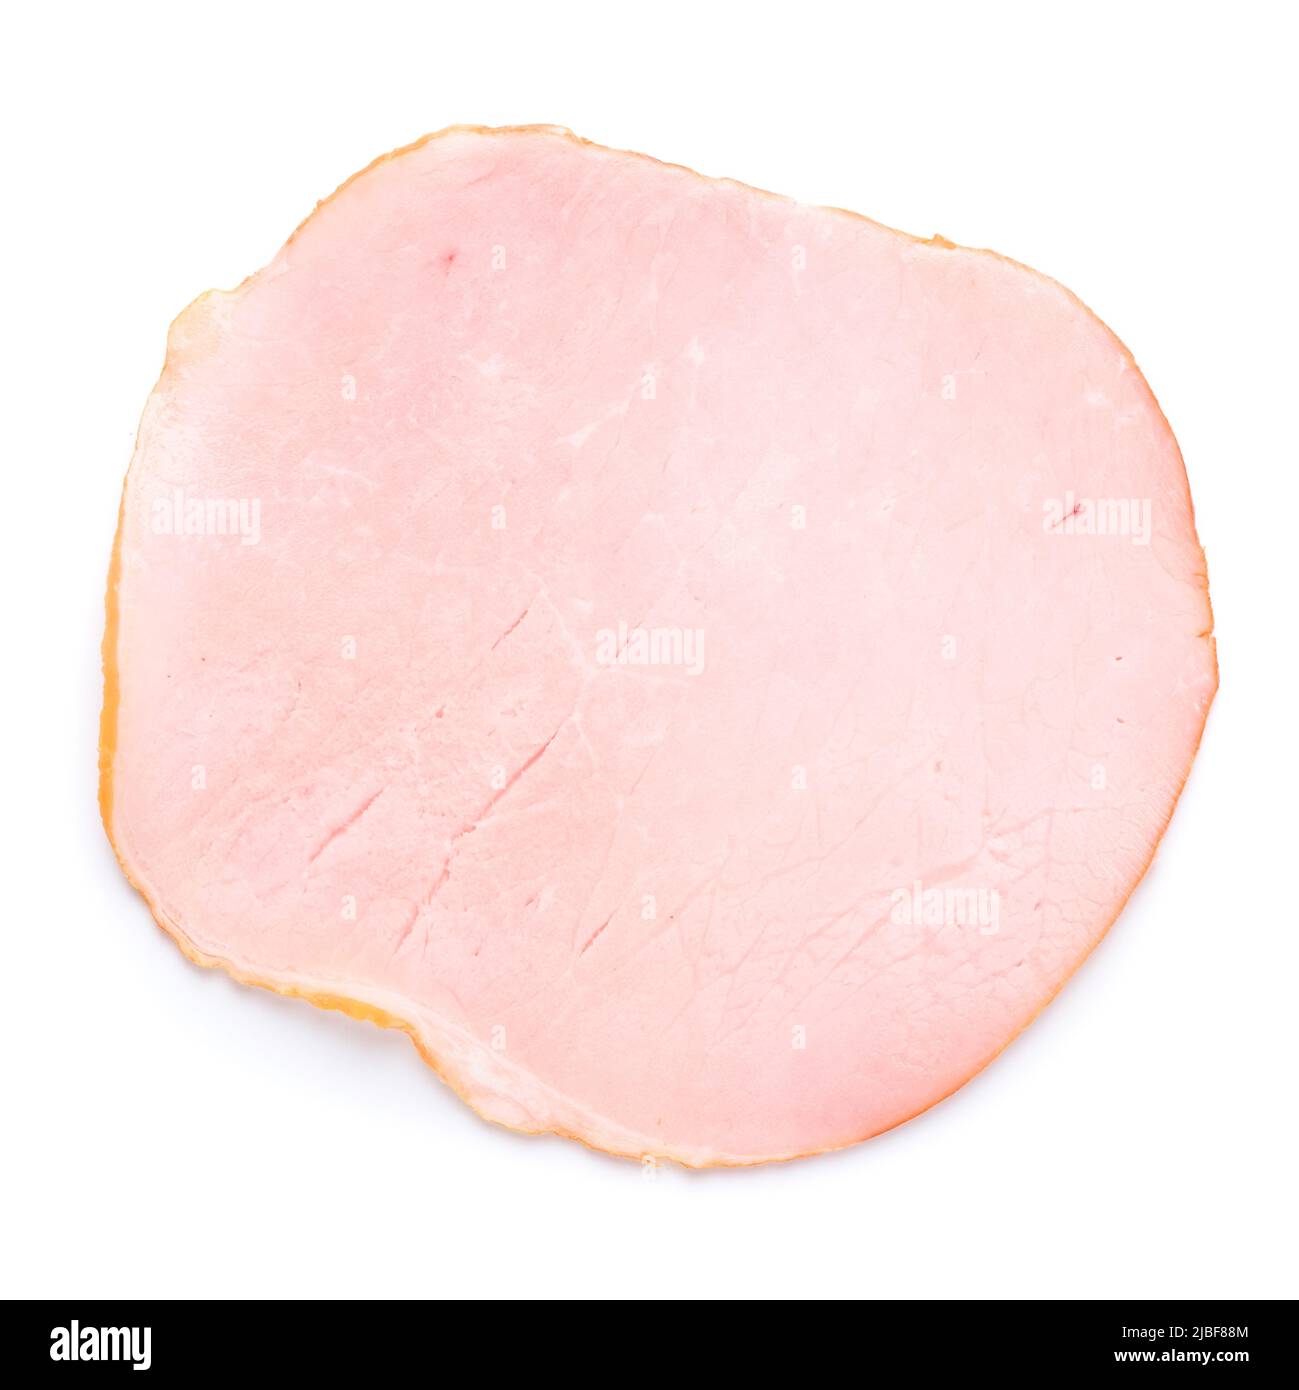 Smoked ham fillet loin slice isolated on white background top view Stock Photo